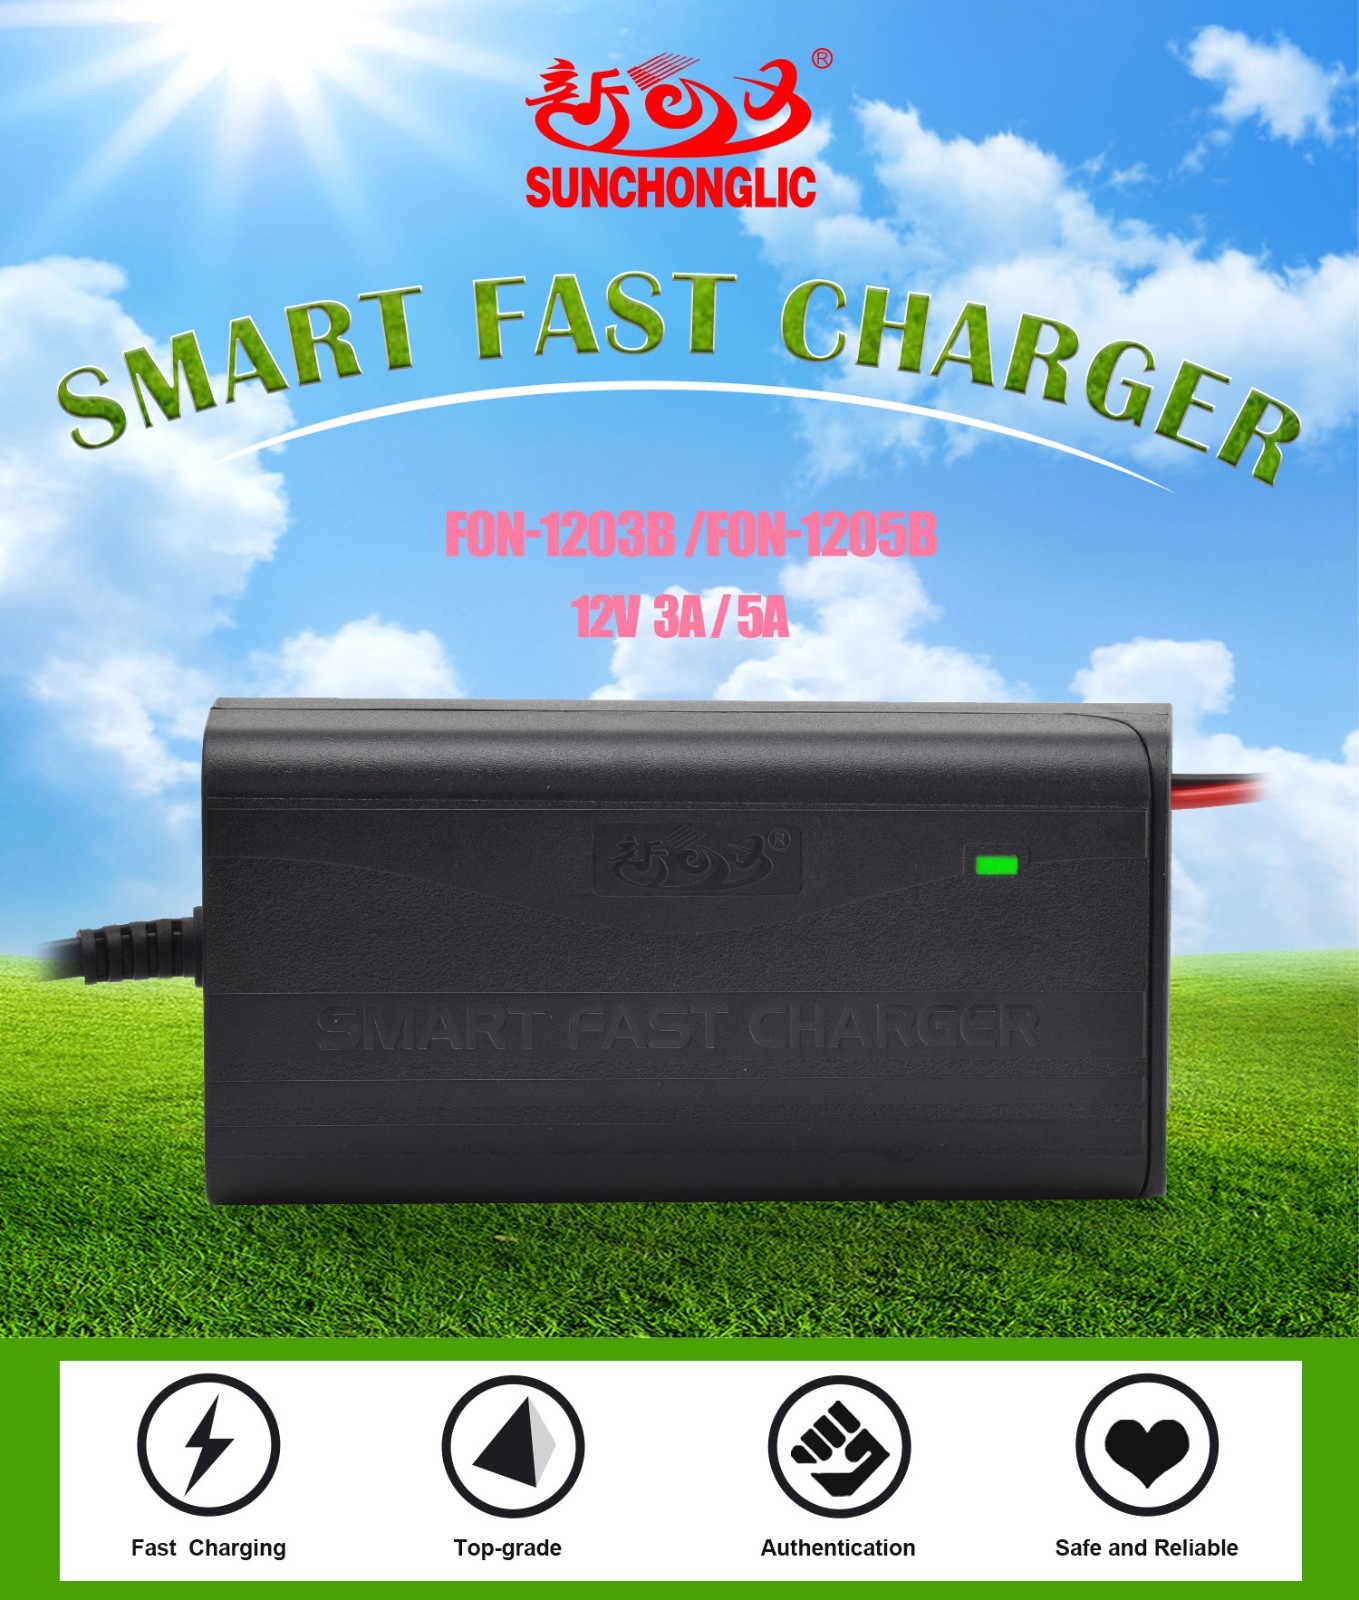 smart fast charger